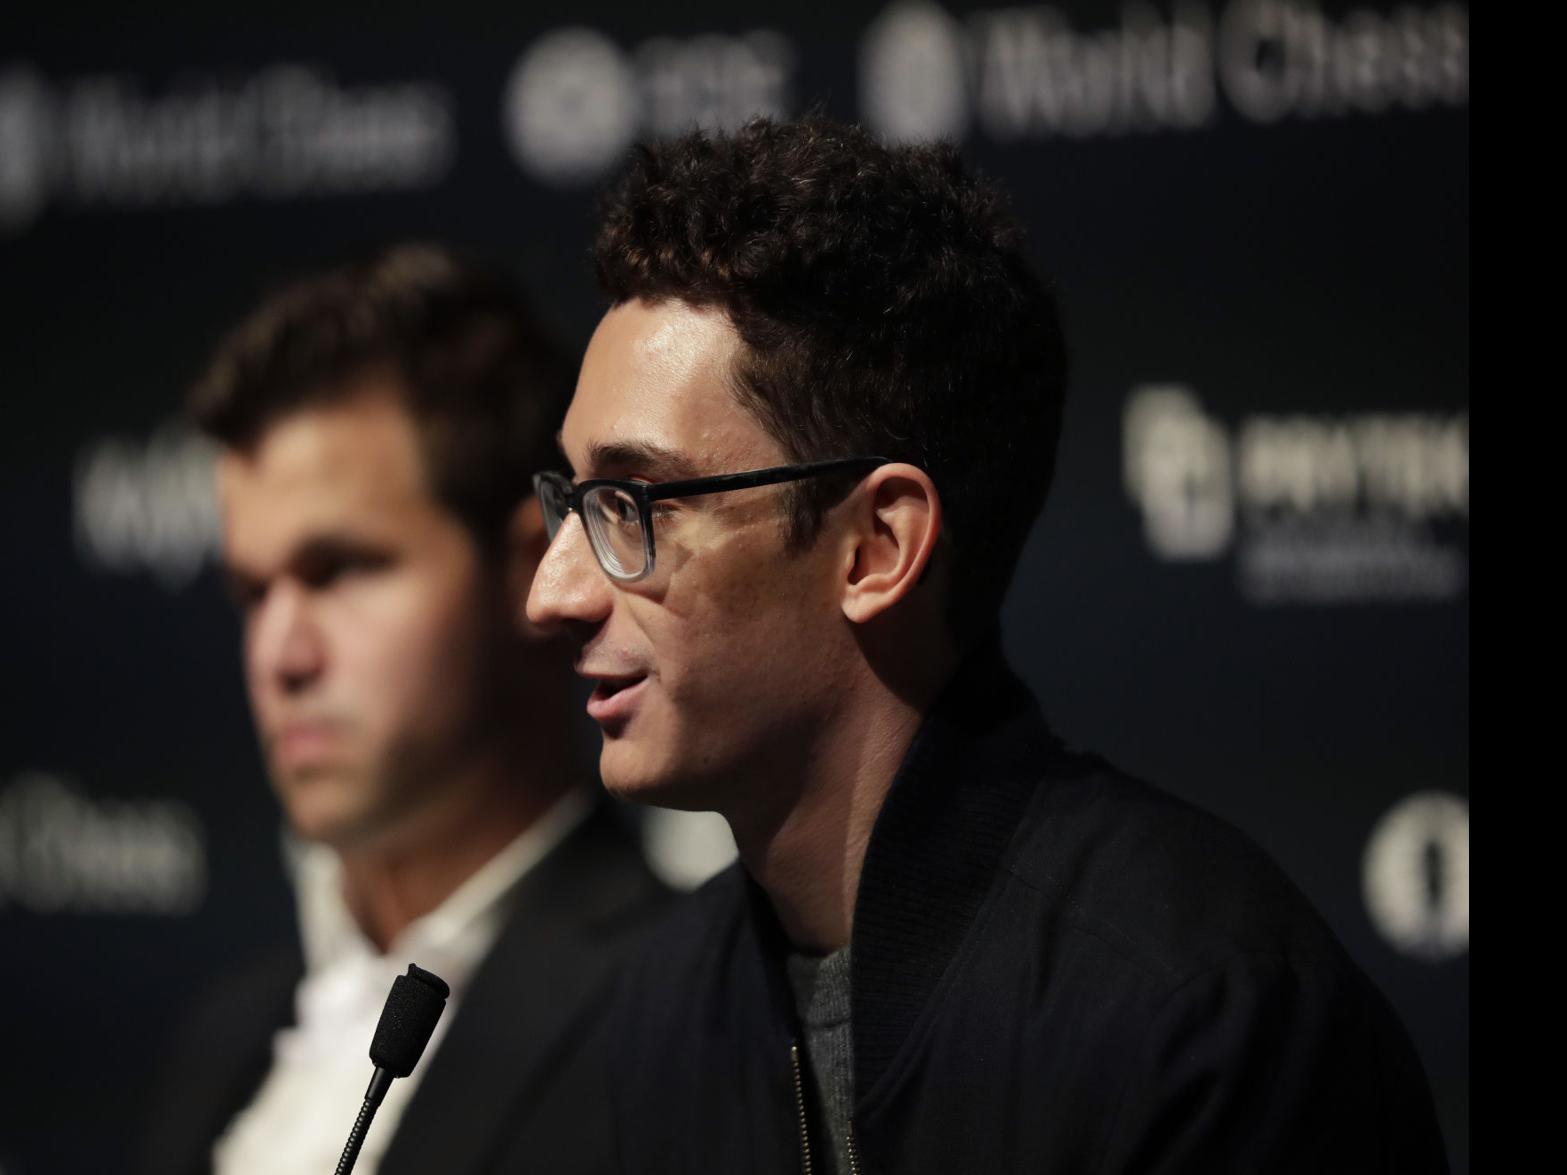 Fabiano Caruana is poised to do what no American has done since Bobby  Fischer. Here's the path he took to get there